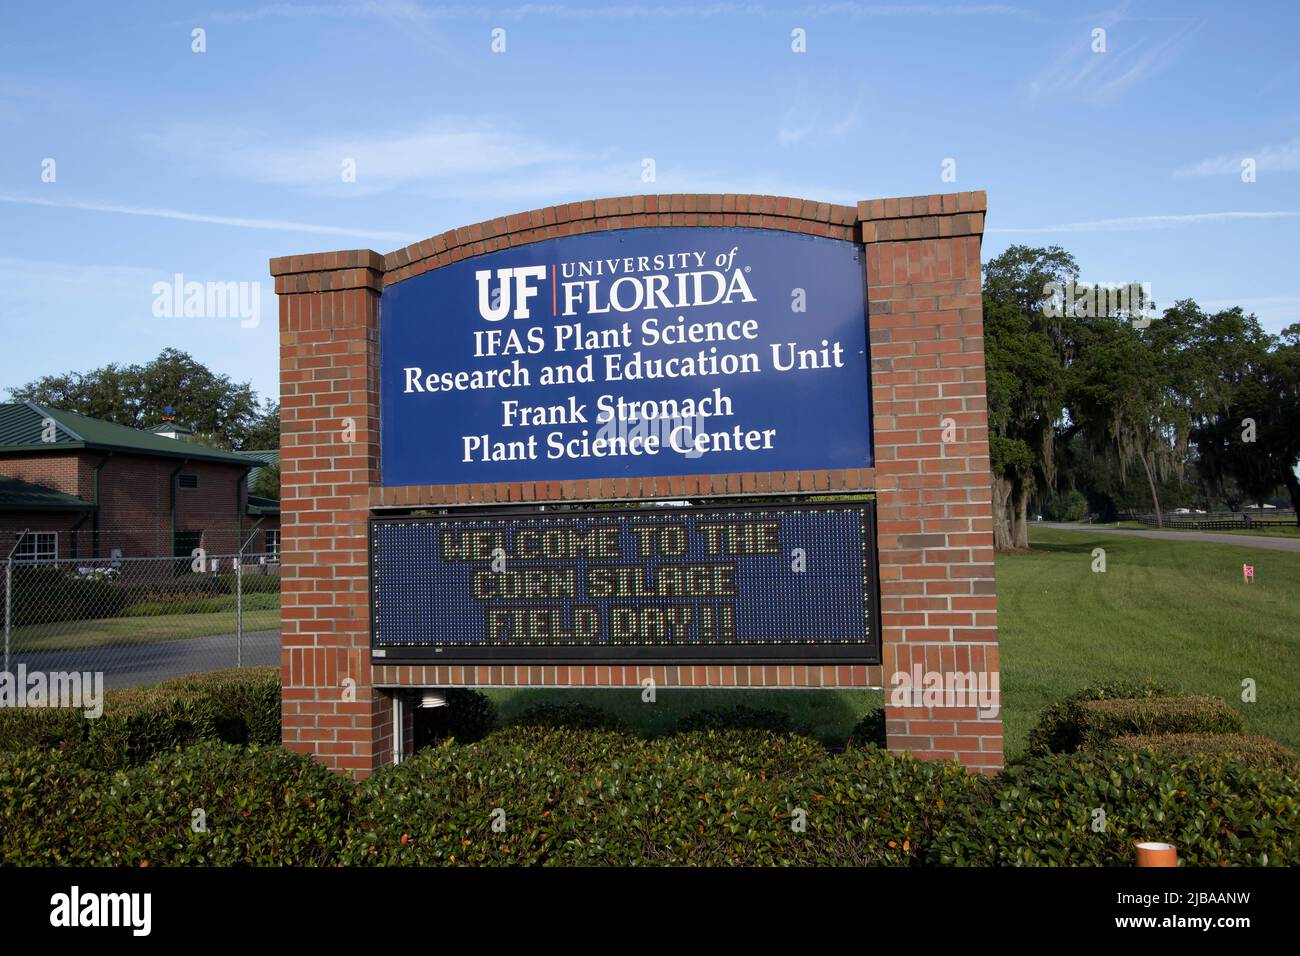 University of Florida IFAS Plant Science Research and Education Unit, in Citra, FL Stockfoto